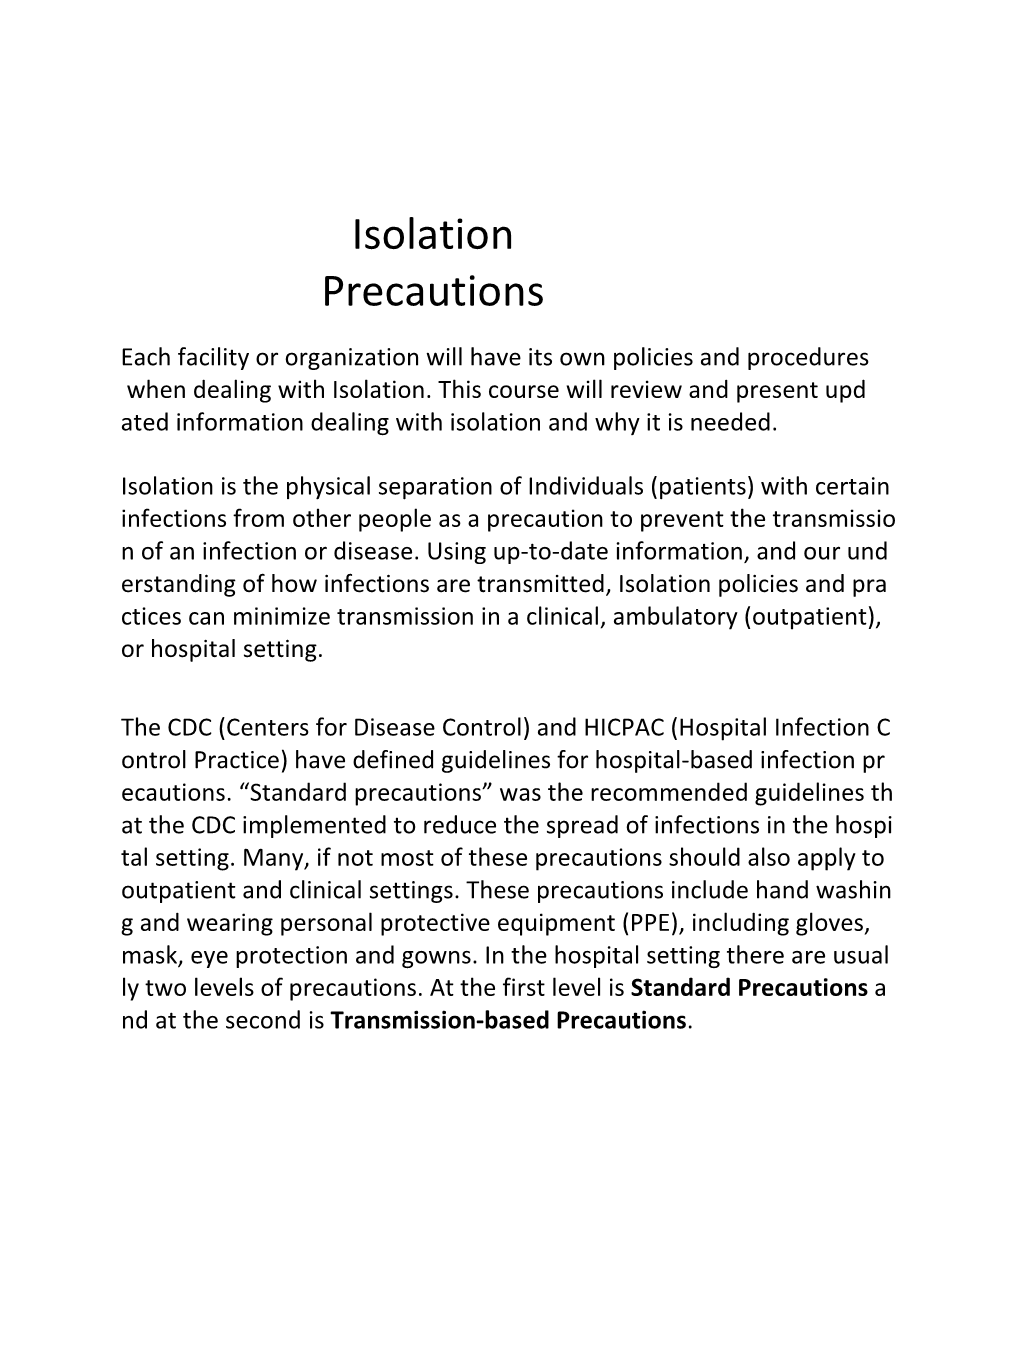 Isolation Precautions Not Only Should Be Use on All Patients, but Any Room Contamination and Should Include